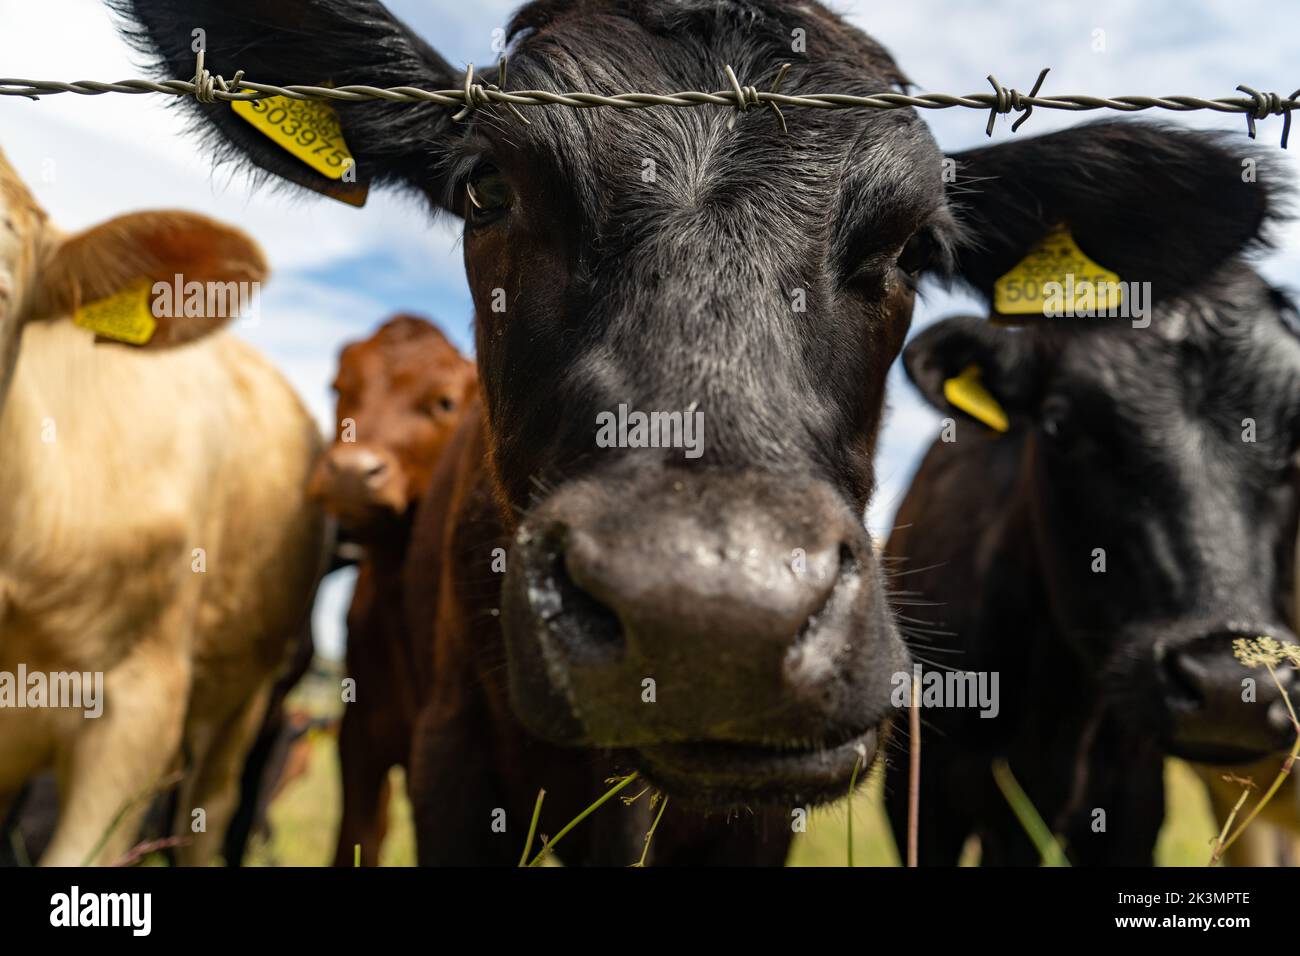 Black young bull curiously coming closer and looking into the camera, cute cow face in closeup. Livestock grazing on the field in summer. Stock Photo